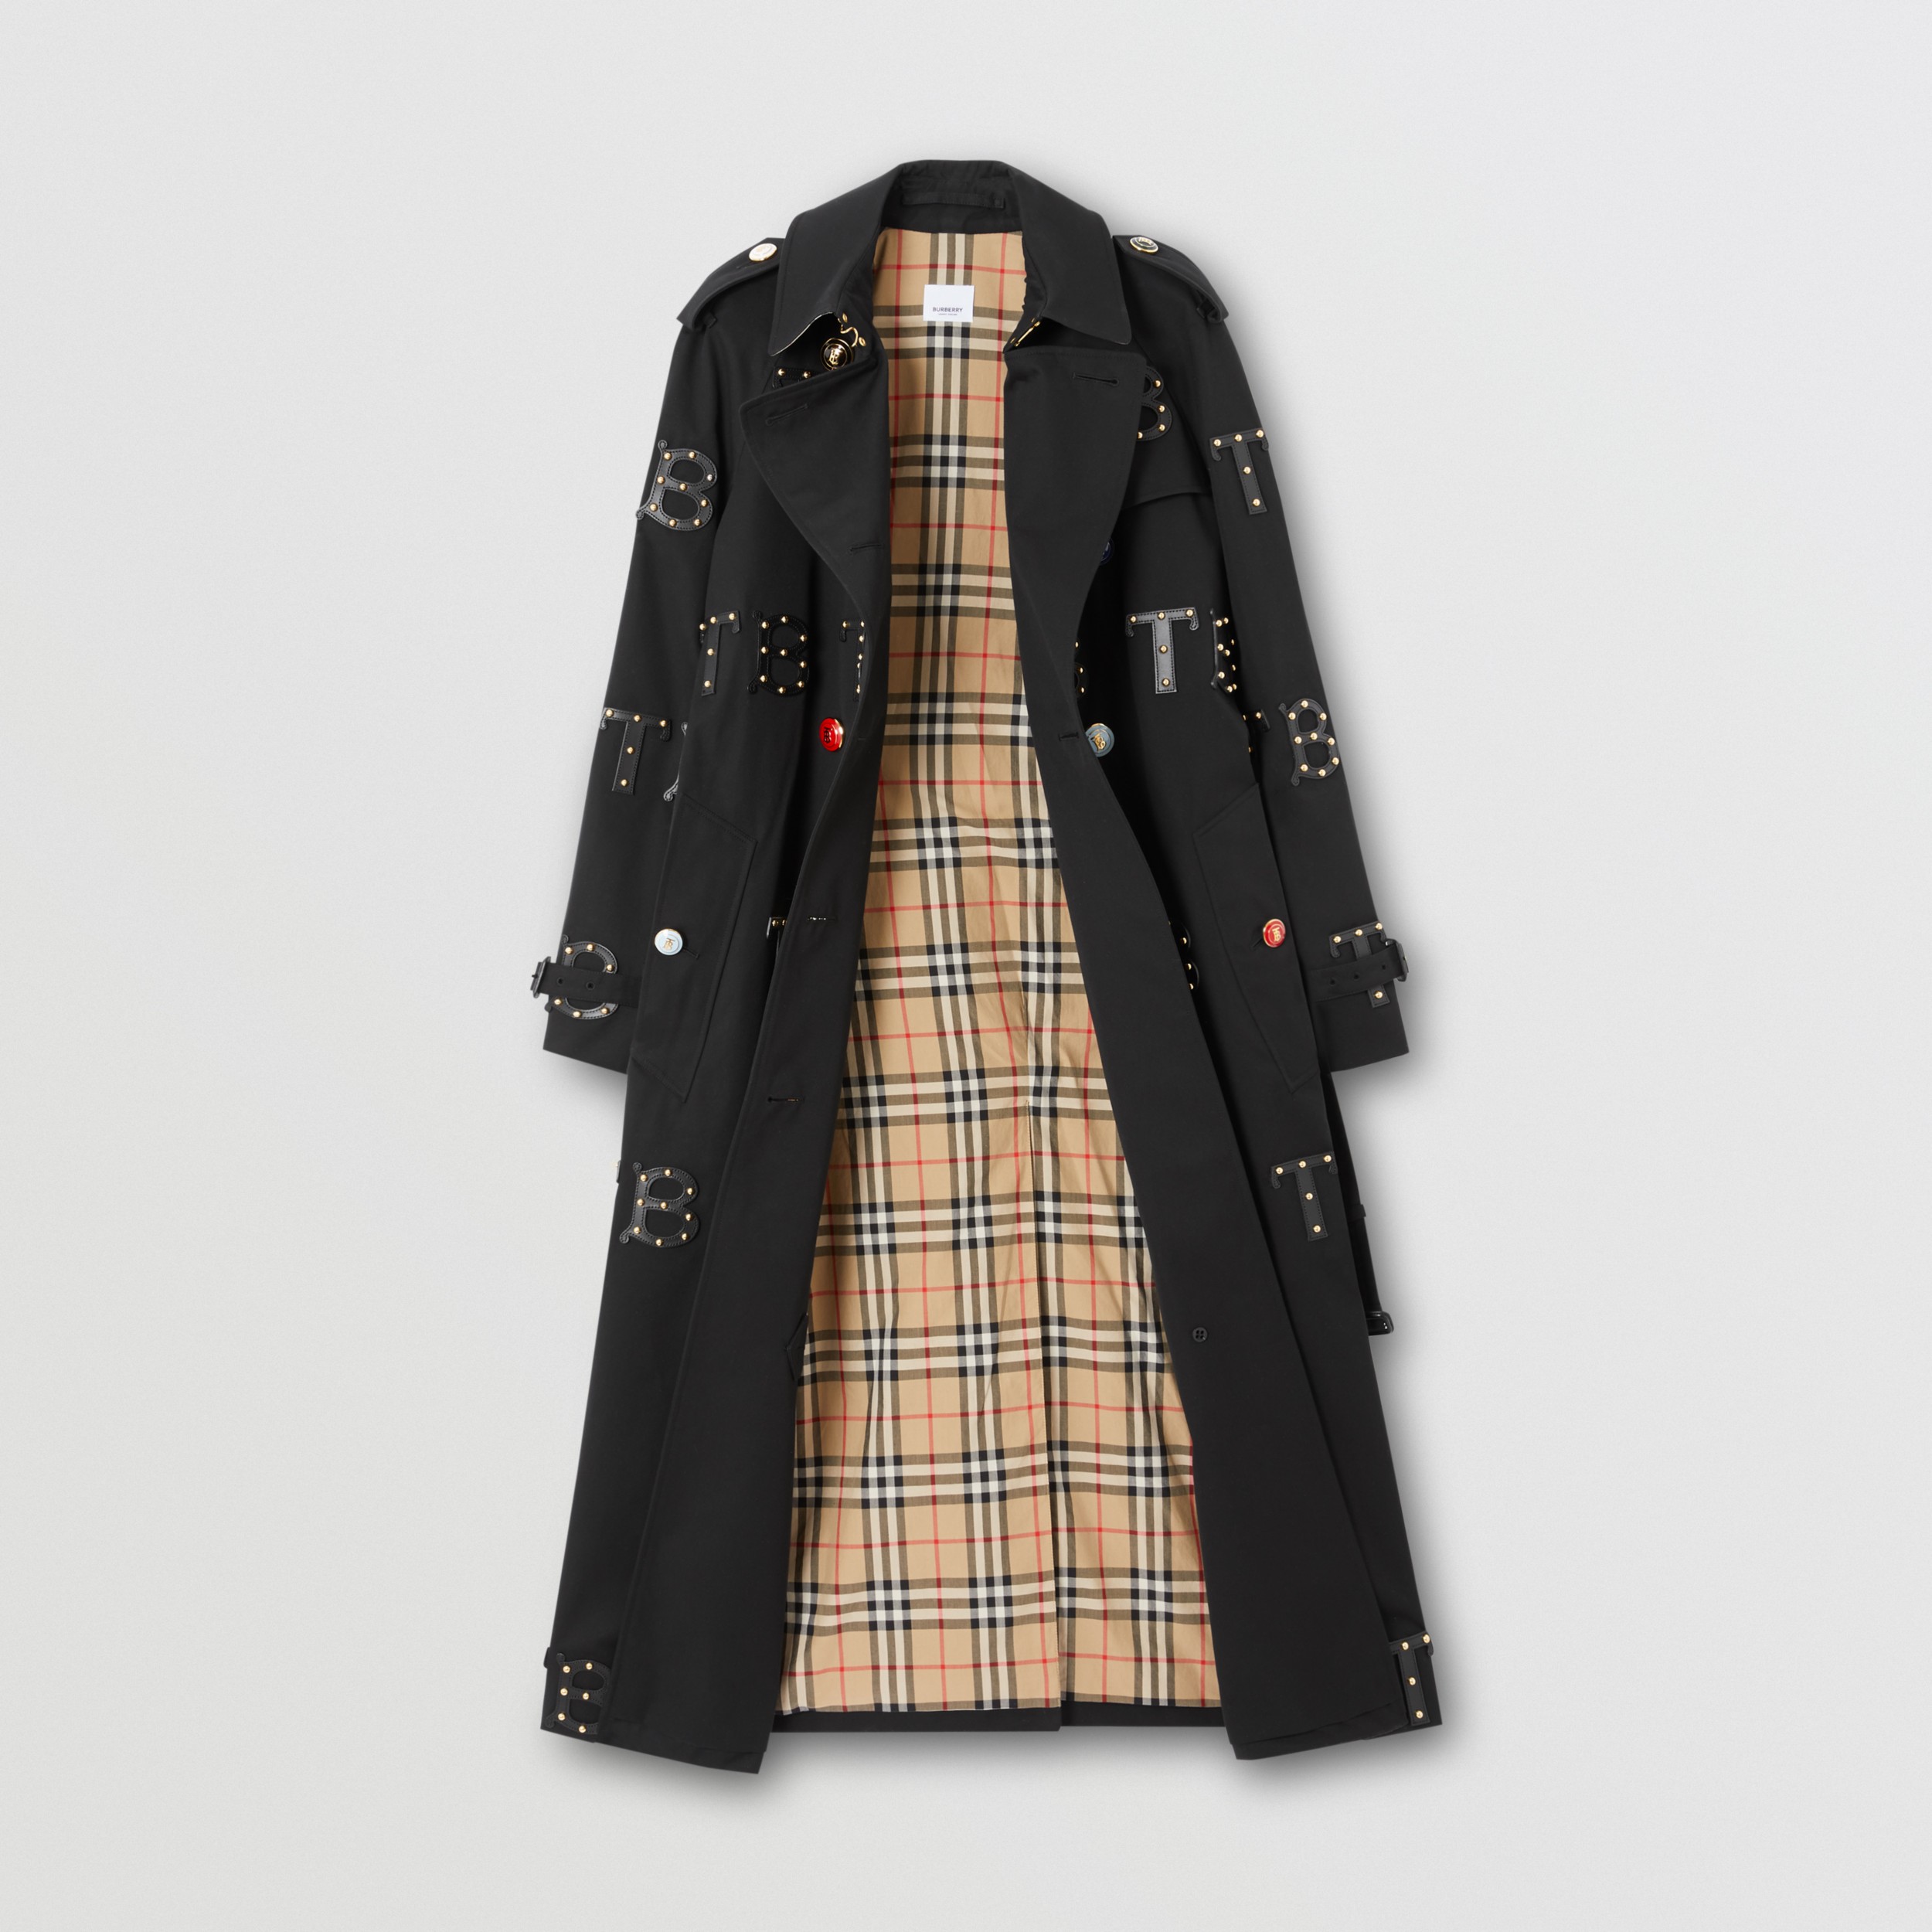 The Long Westminster Trench Coat in Black Burberry Hong Kong S.A.R., China